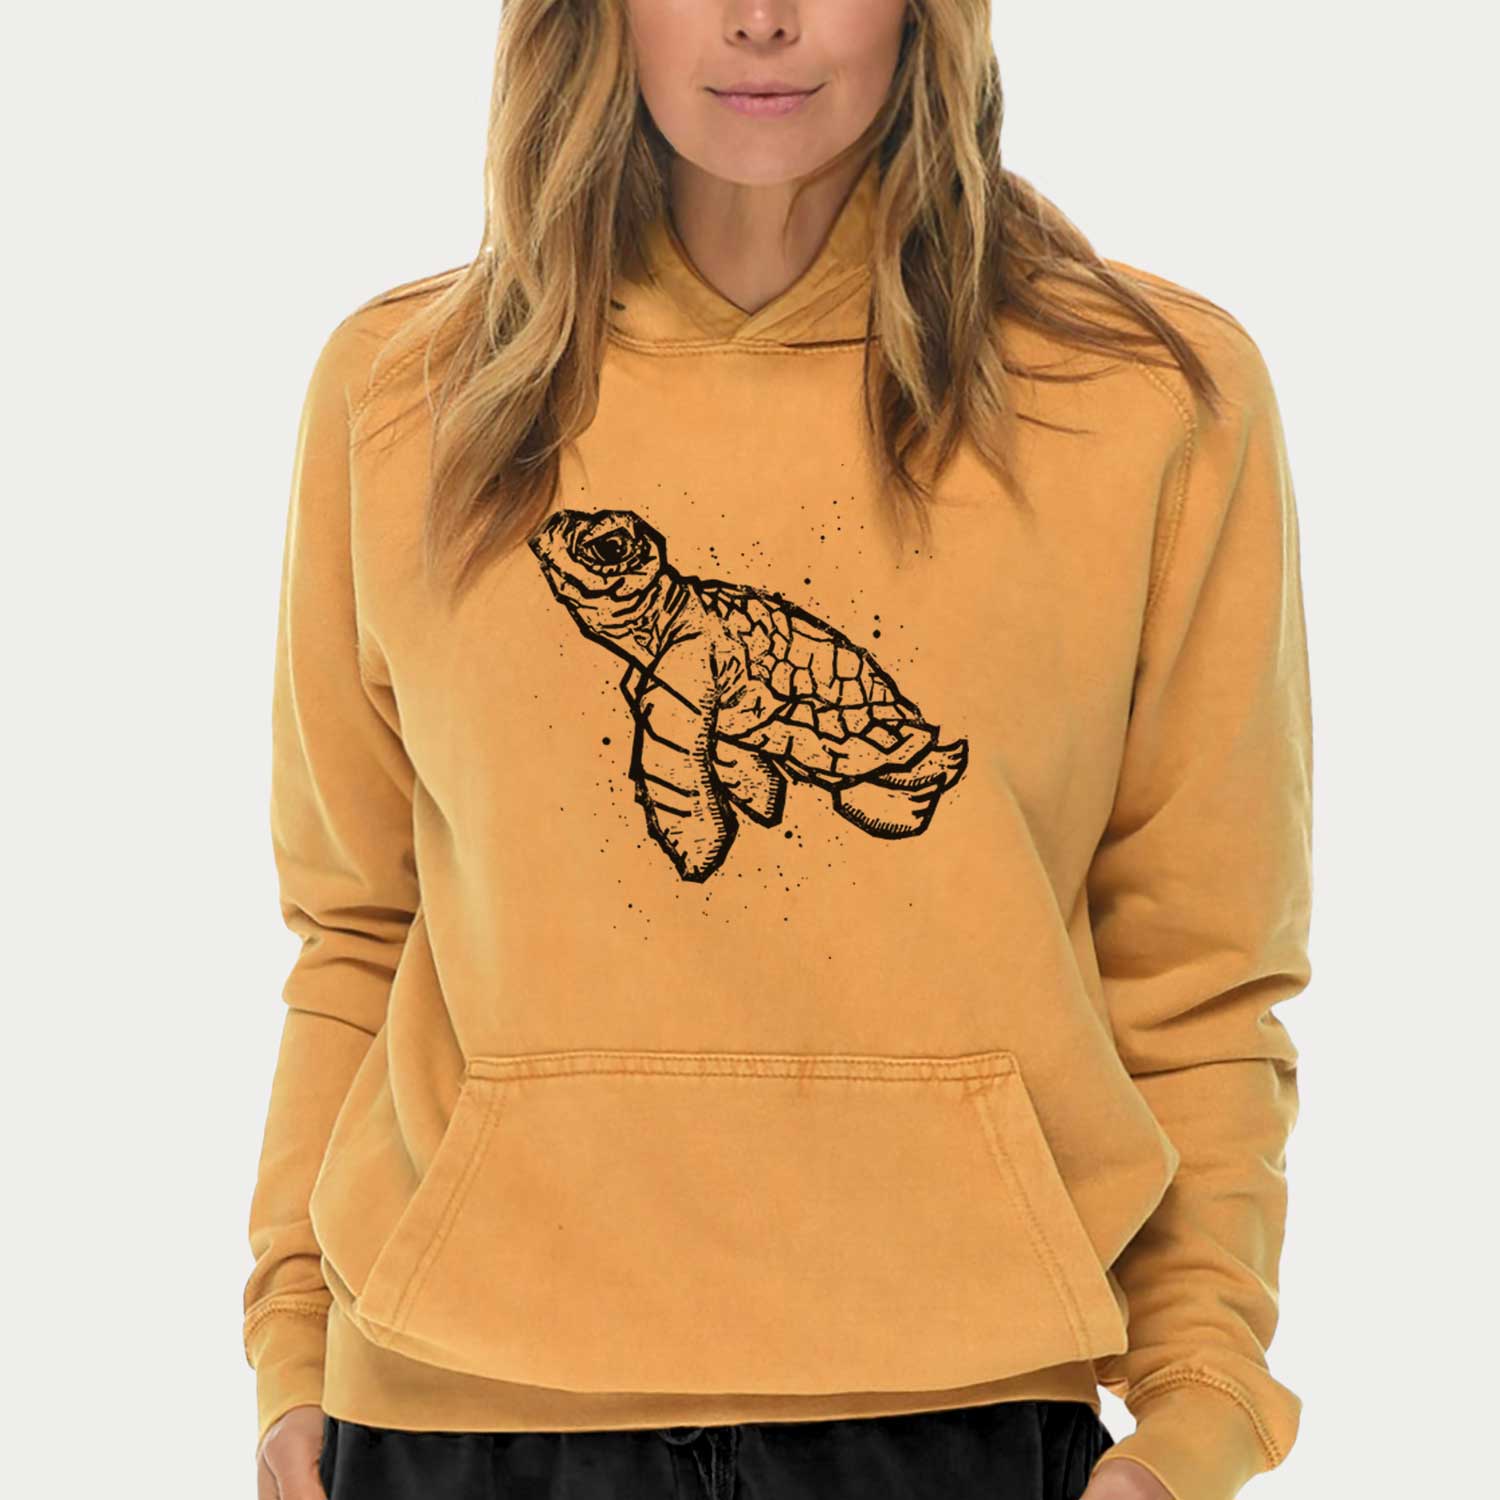 Baby Sea Turtle Clothing | Mens and Women's Turtle Shirts 